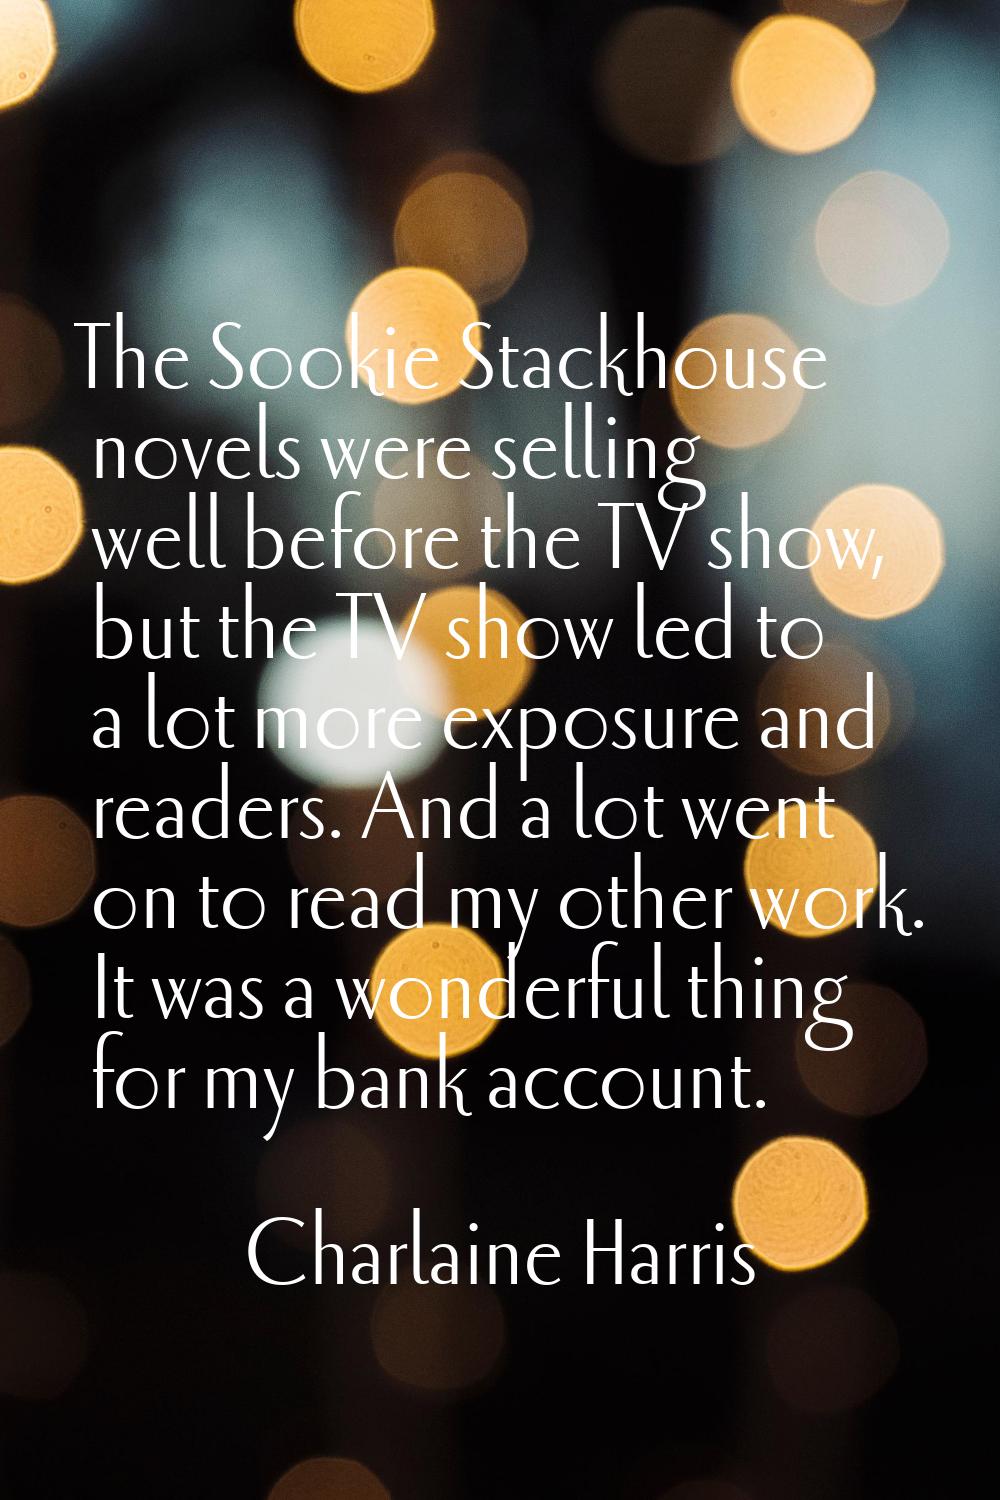 The Sookie Stackhouse novels were selling well before the TV show, but the TV show led to a lot mor